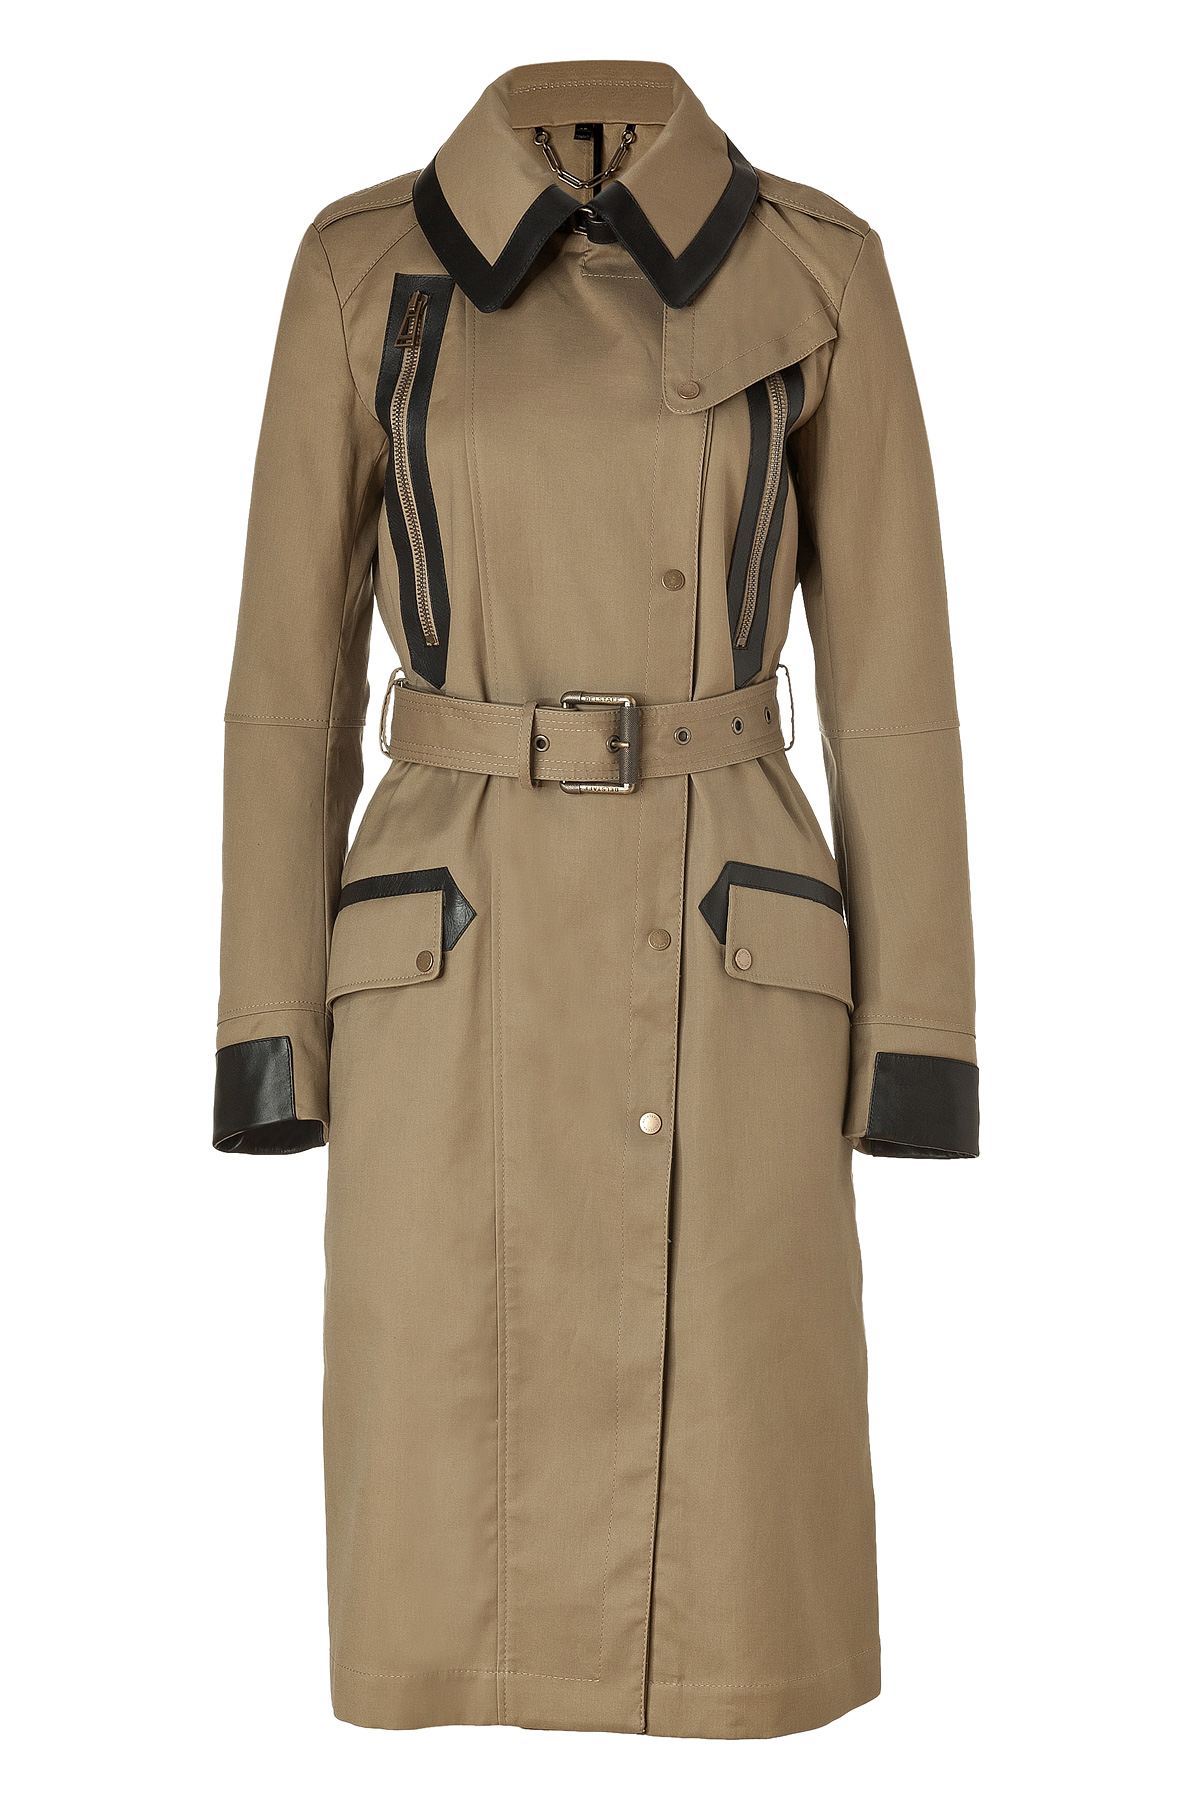 Belstaff Putty Daventry Trench Coat with Leather Trim in Khaki | Lyst